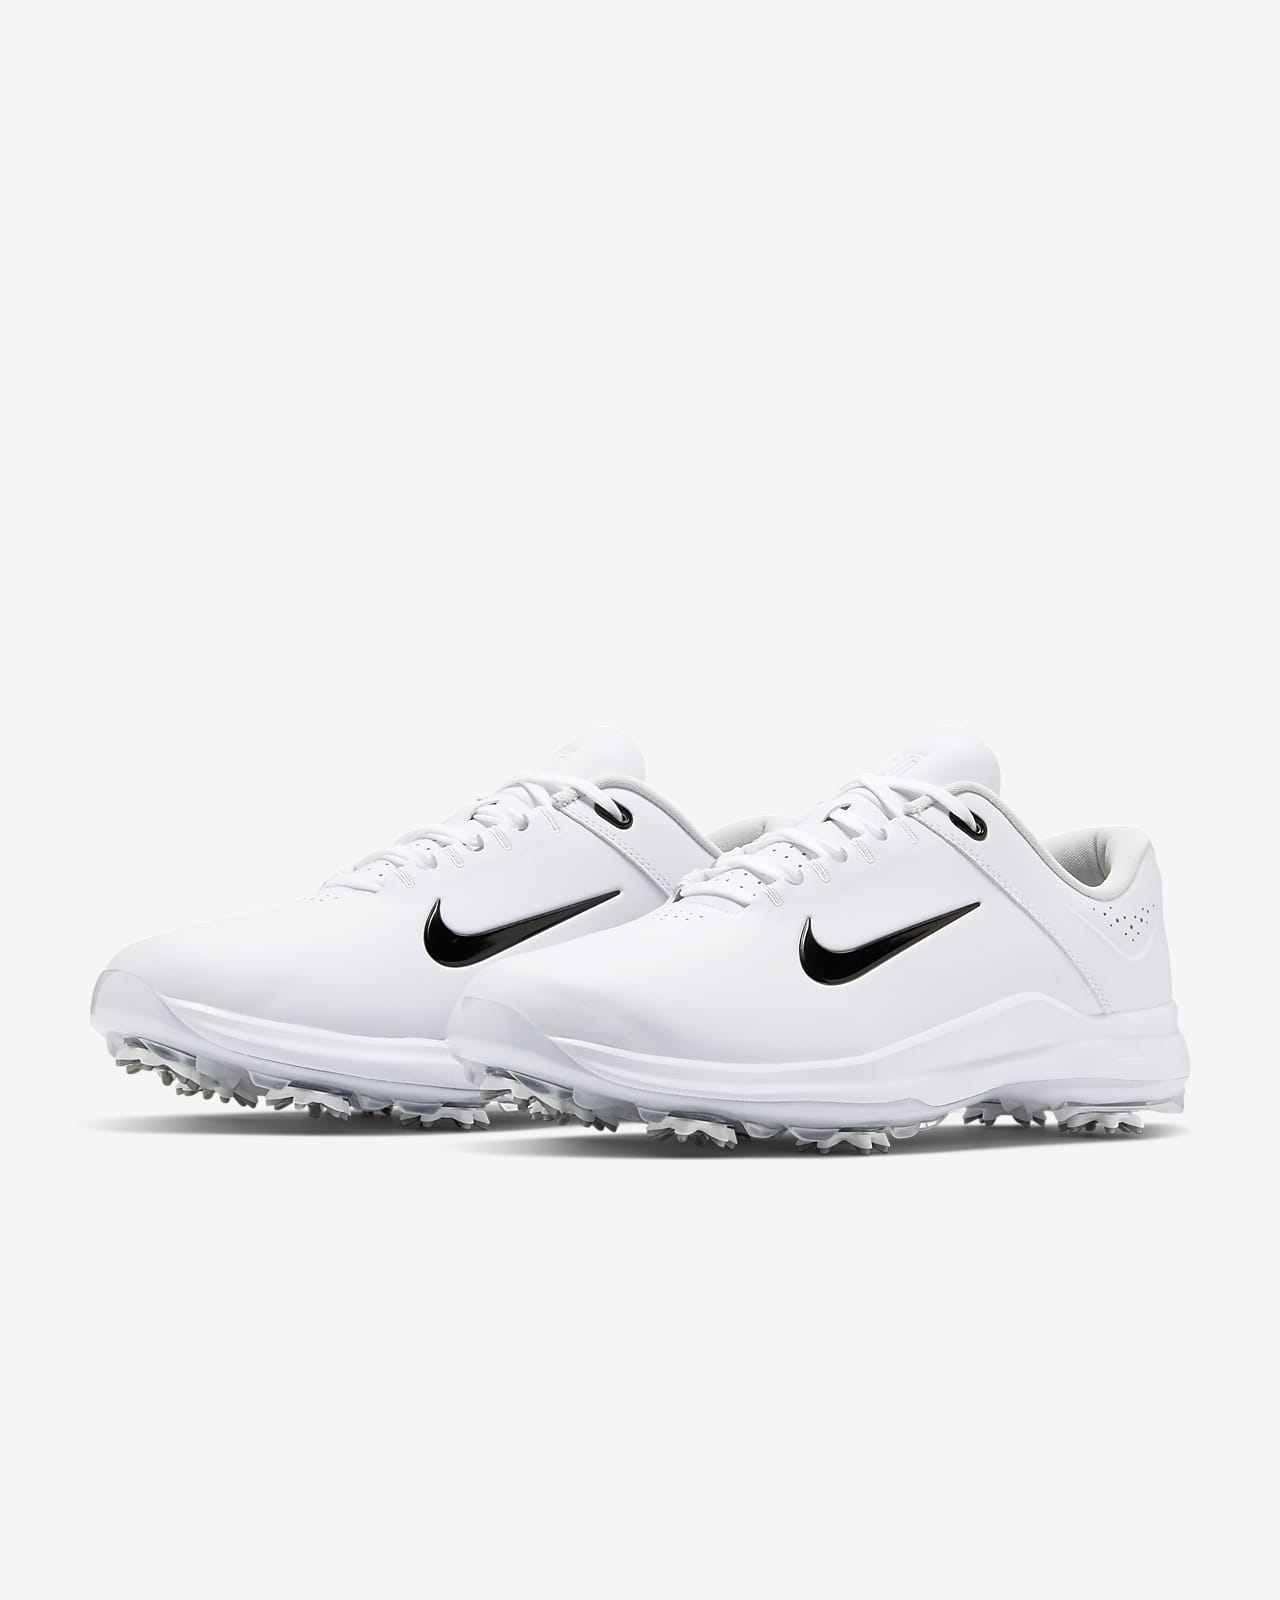 nike tiger woods golf shoes 2020